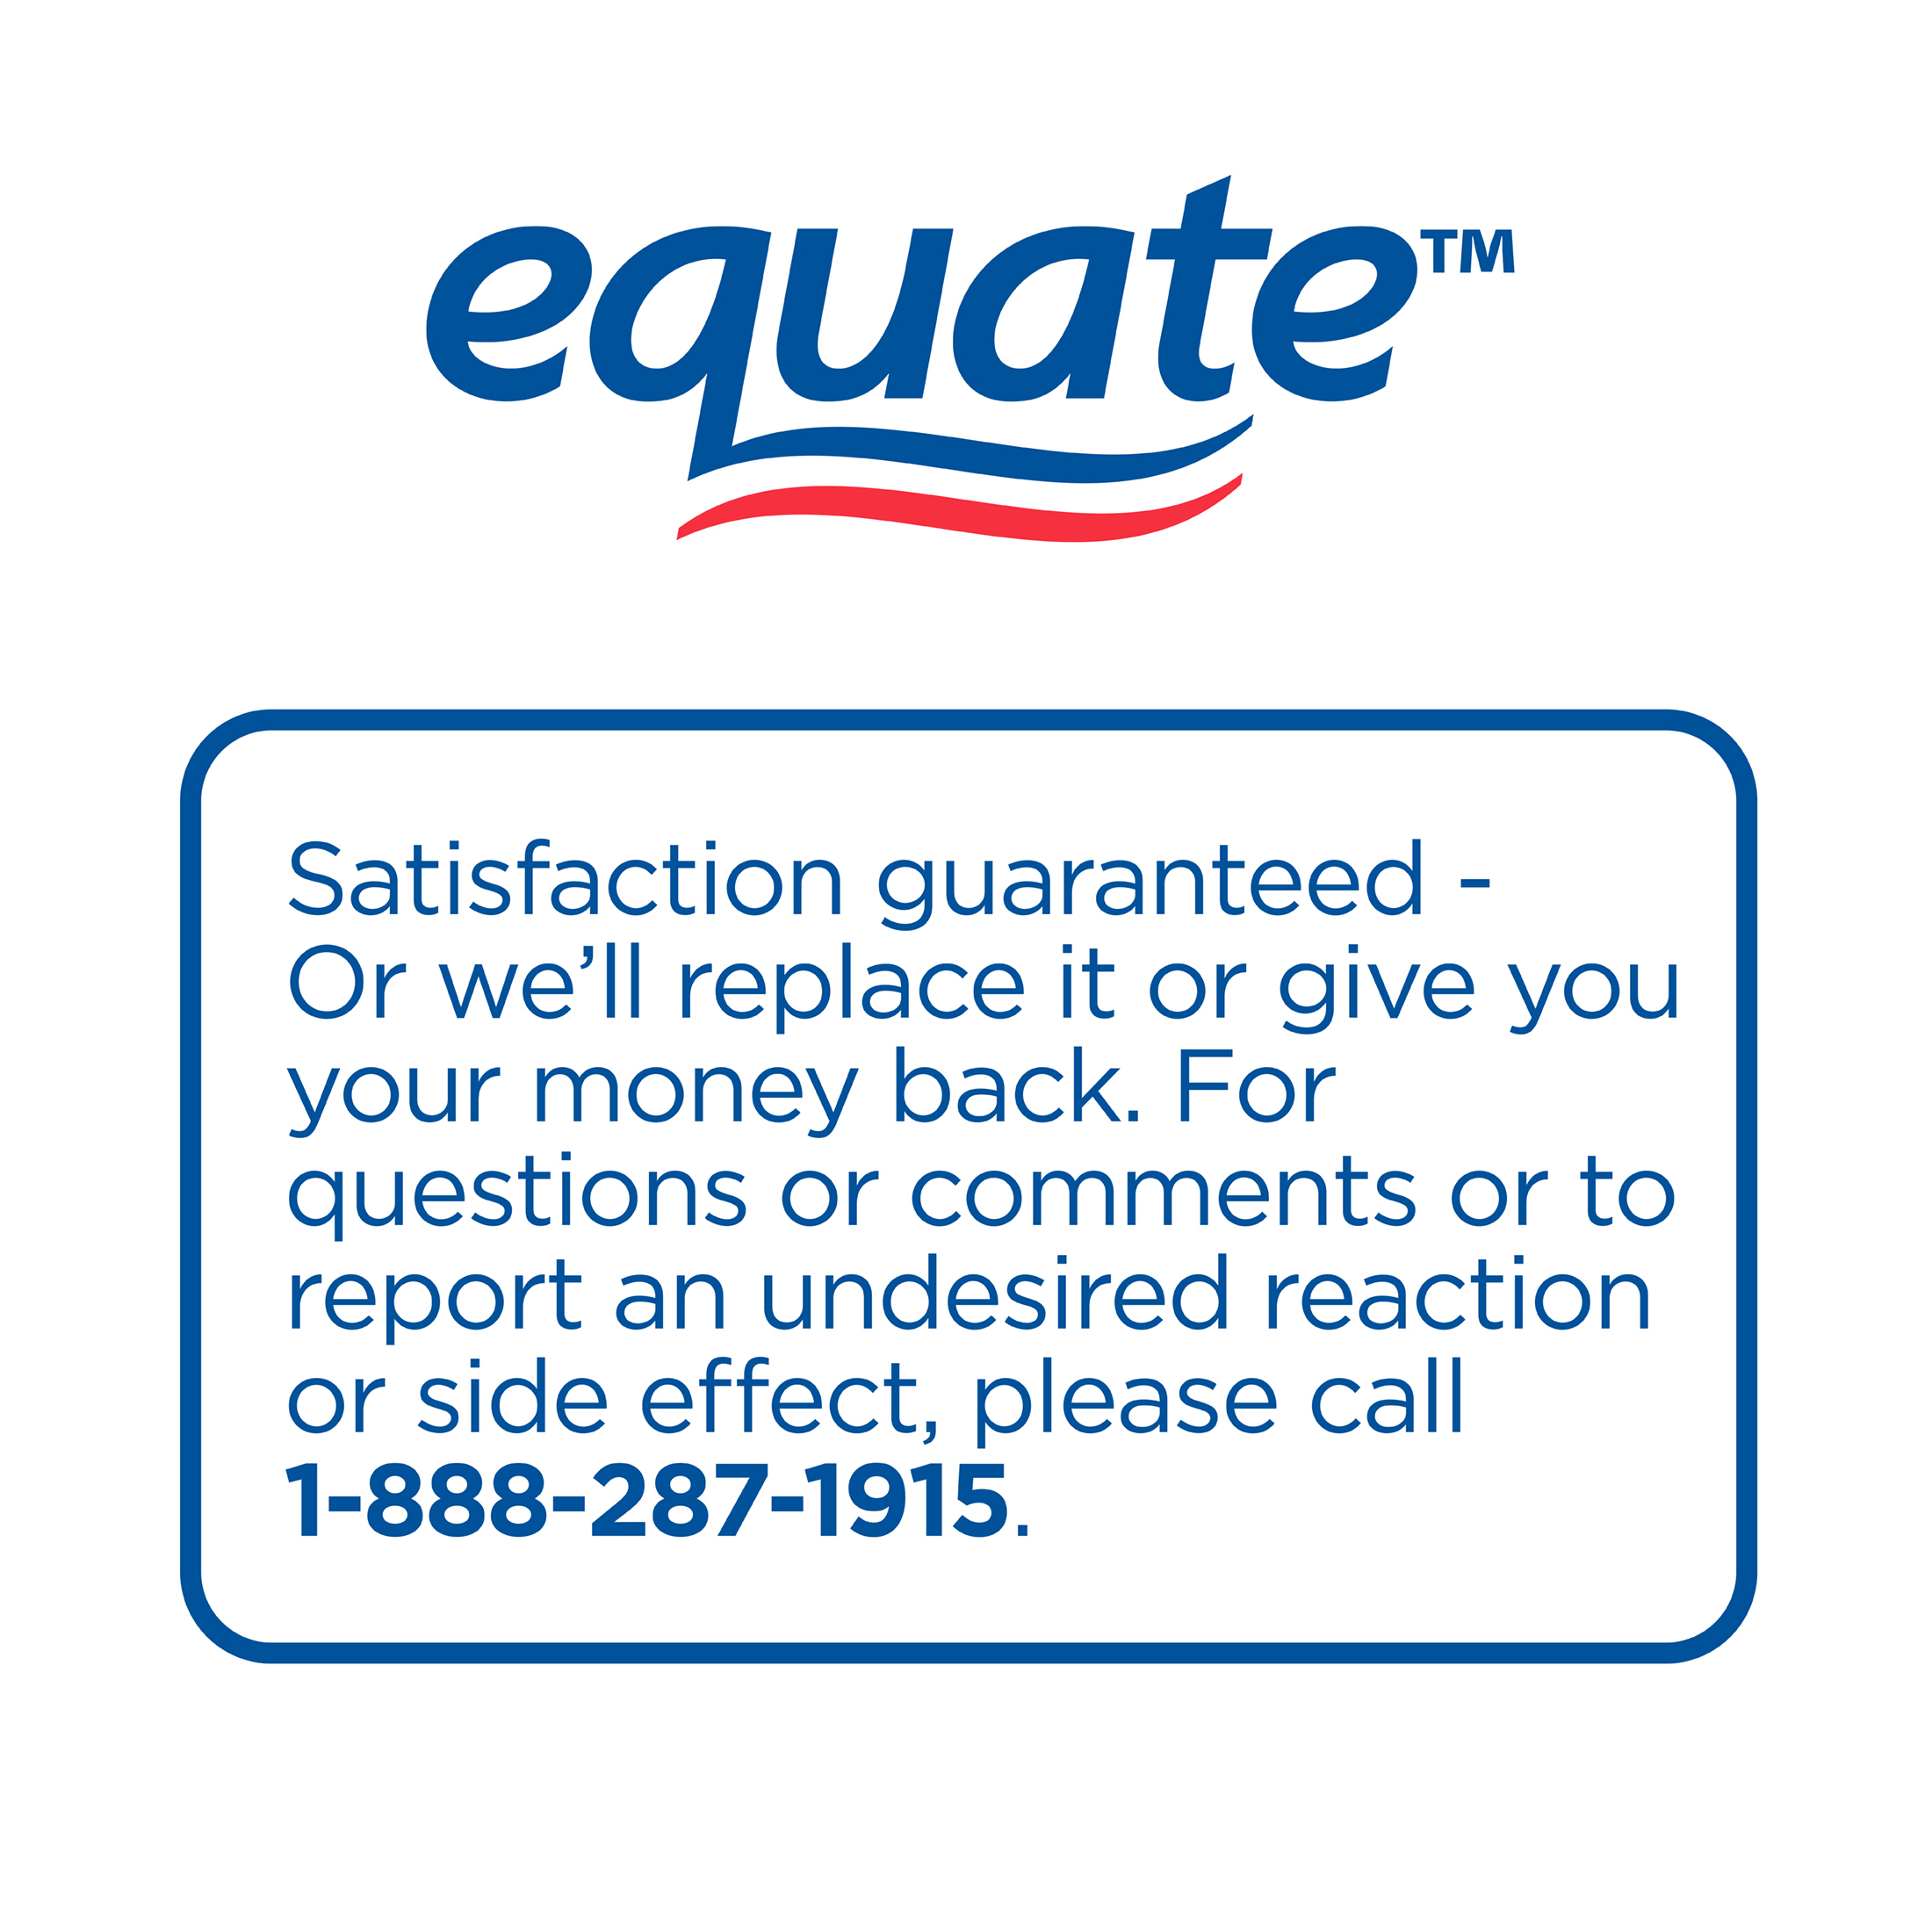 Equate First Aid Triple Antibiotic Ointment, 1 Ounce - image 5 of 7